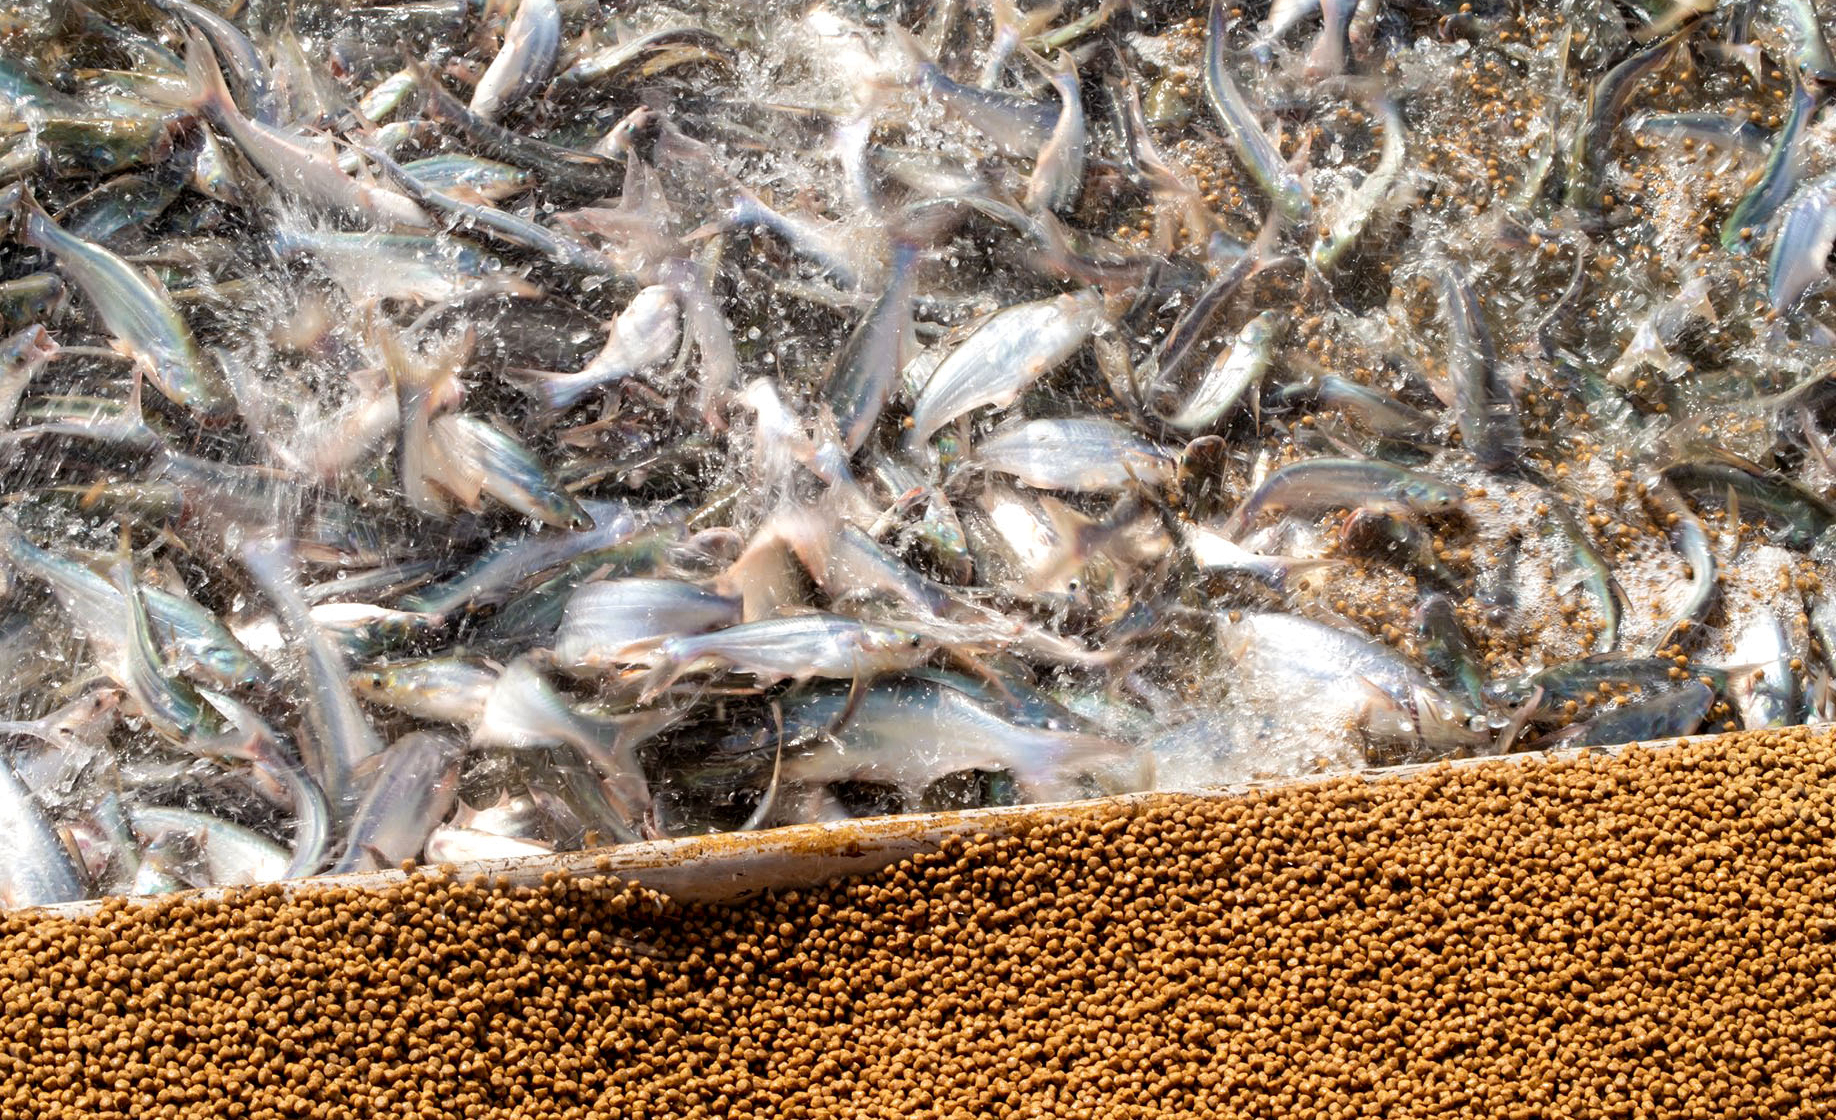 The increase in feed prices has increased the cost of raising pangasius. Photo: Son Trang.